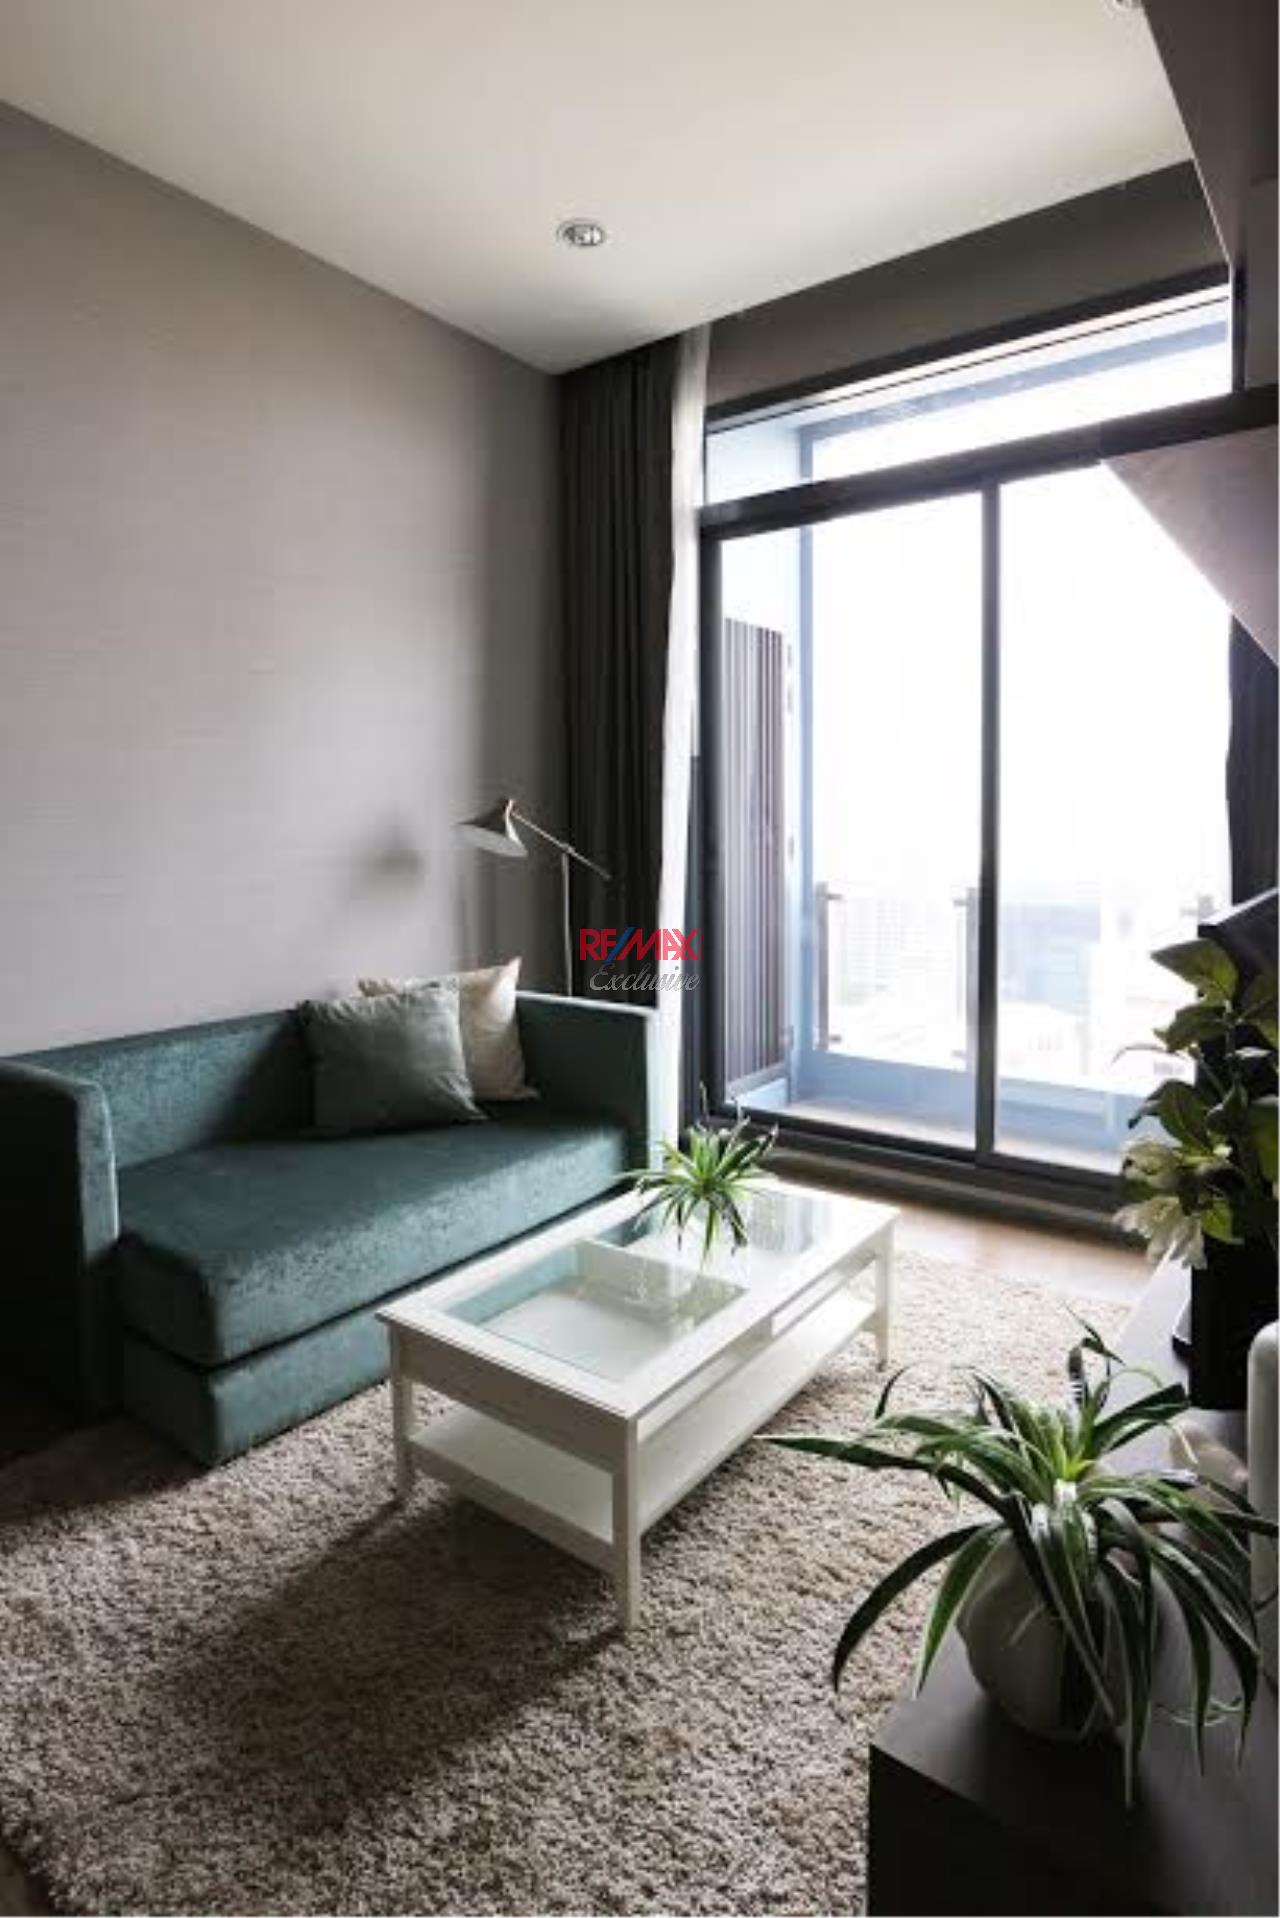 RE/MAX Exclusive Agency's Diplomat Sathorn, 2 Bedrooms, 2 Bathrooms, For Rent Only 75,000 THB 4